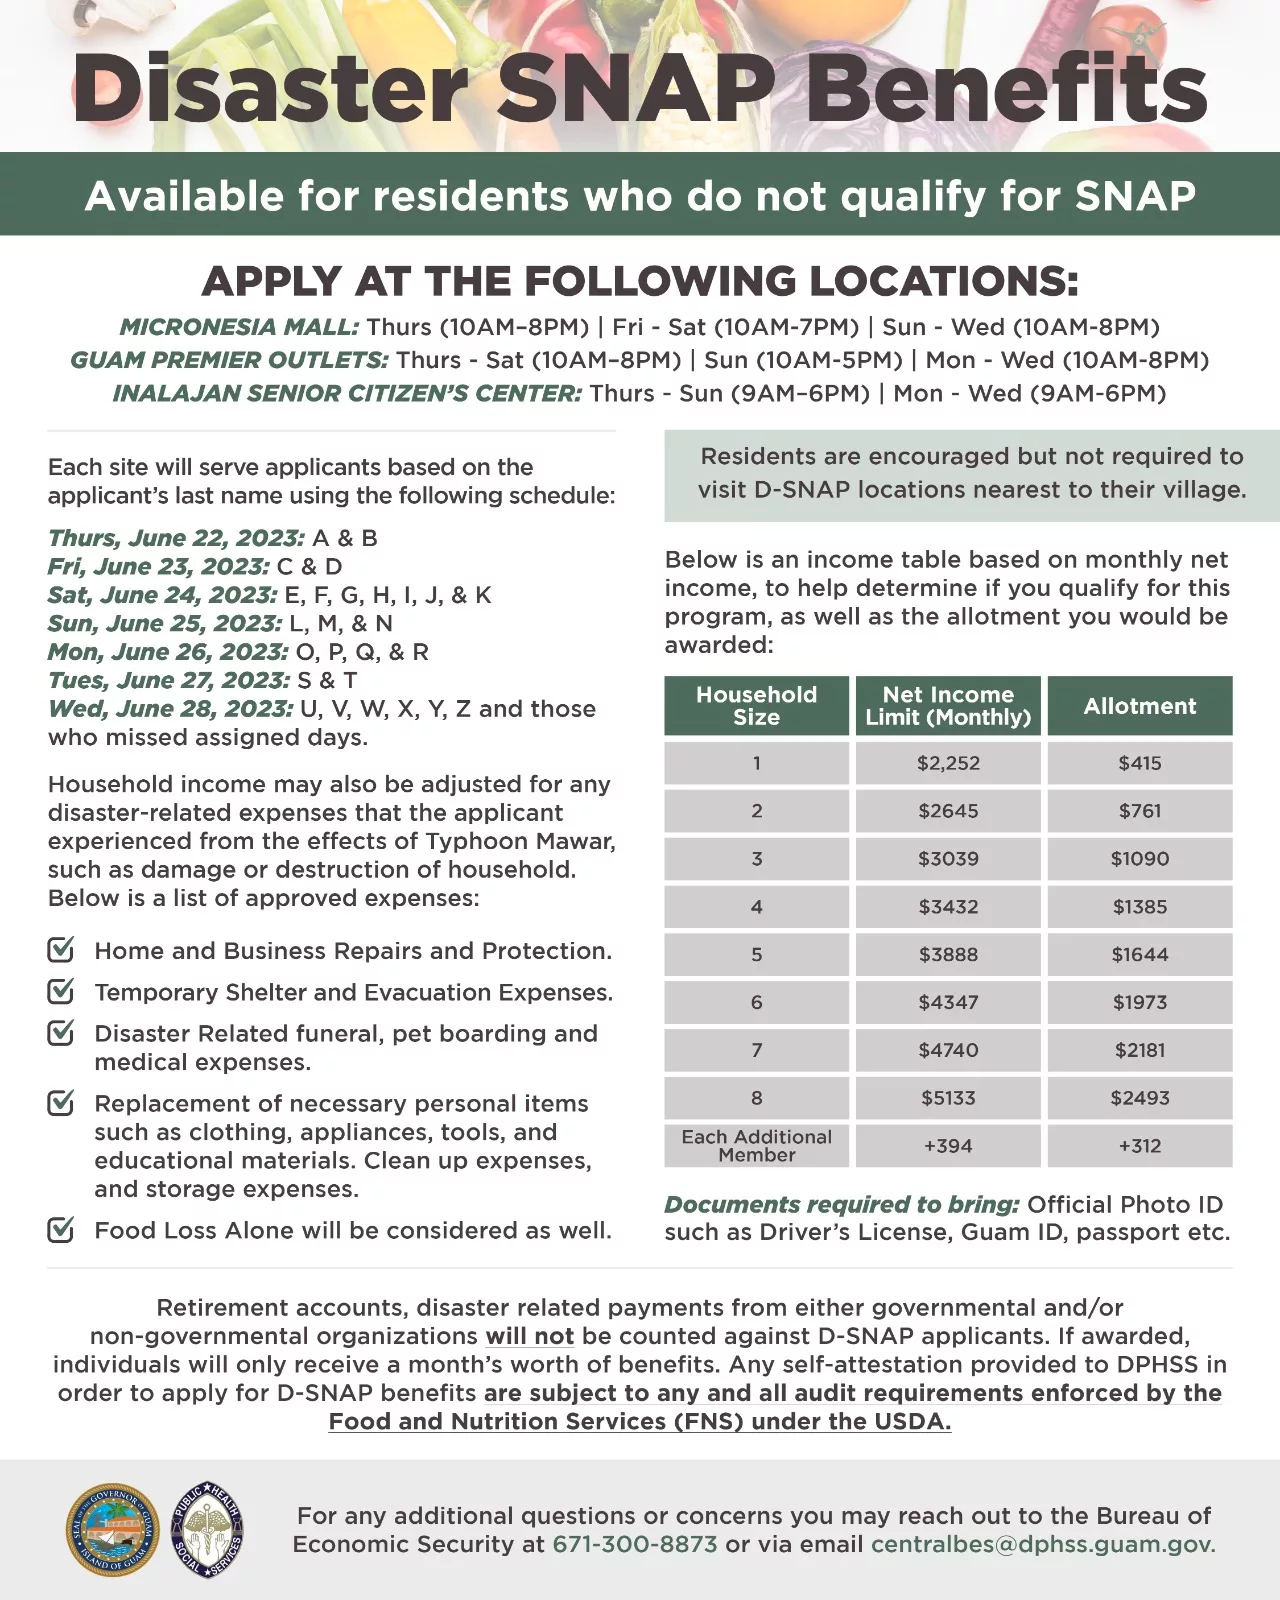 Disaster SNAP Benefits Available for Residents that Do Not Qualify for SNAP